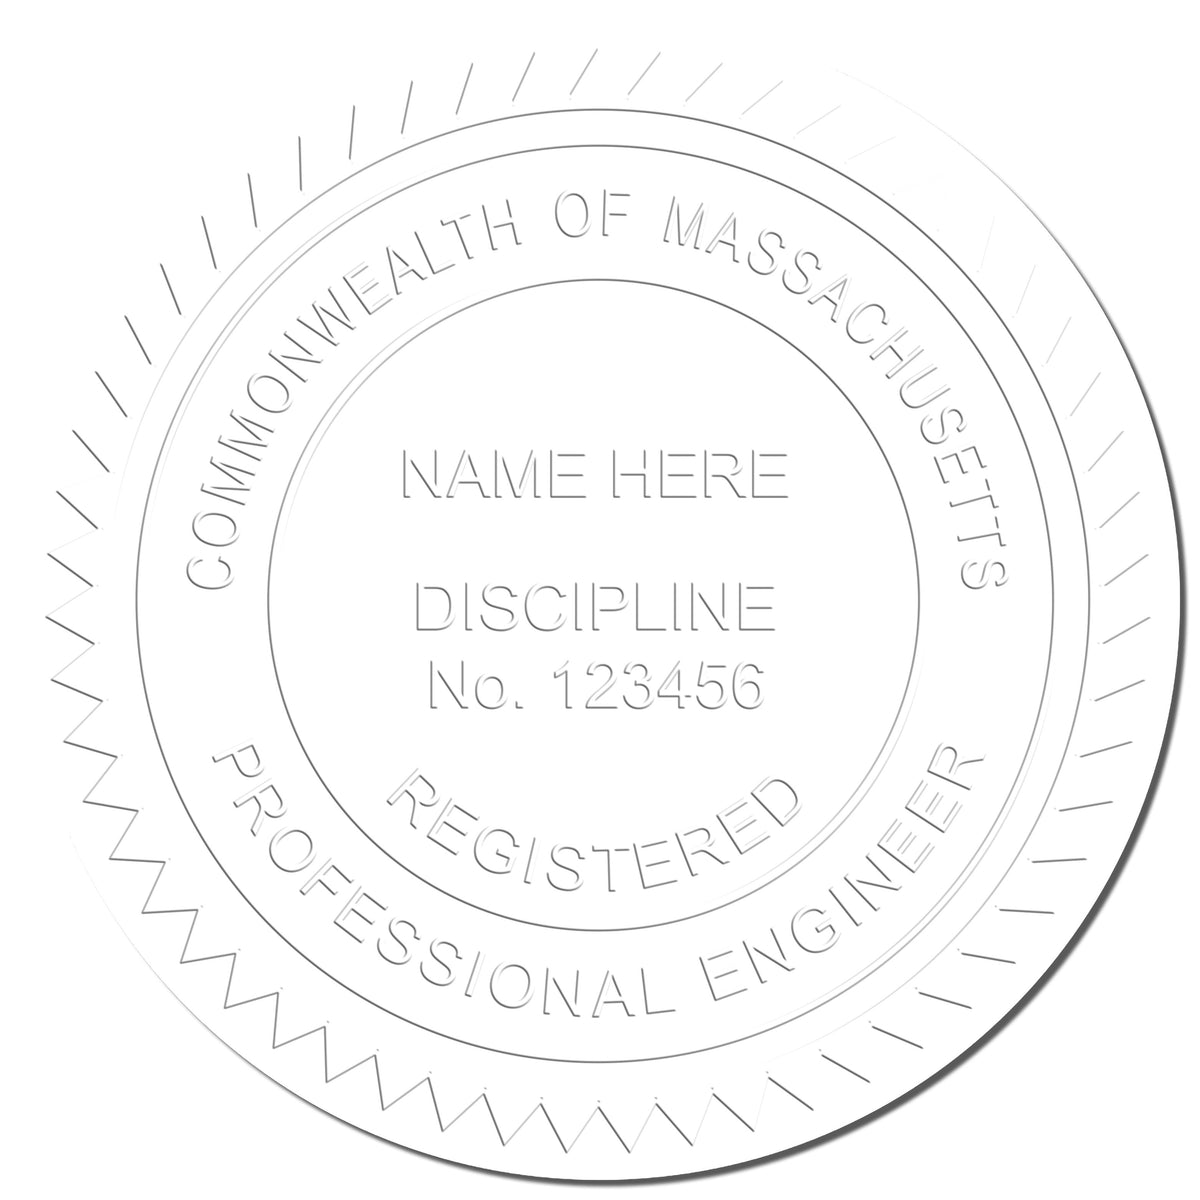 This paper is stamped with a sample imprint of the State of Massachusetts Extended Long Reach Engineer Seal, signifying its quality and reliability.